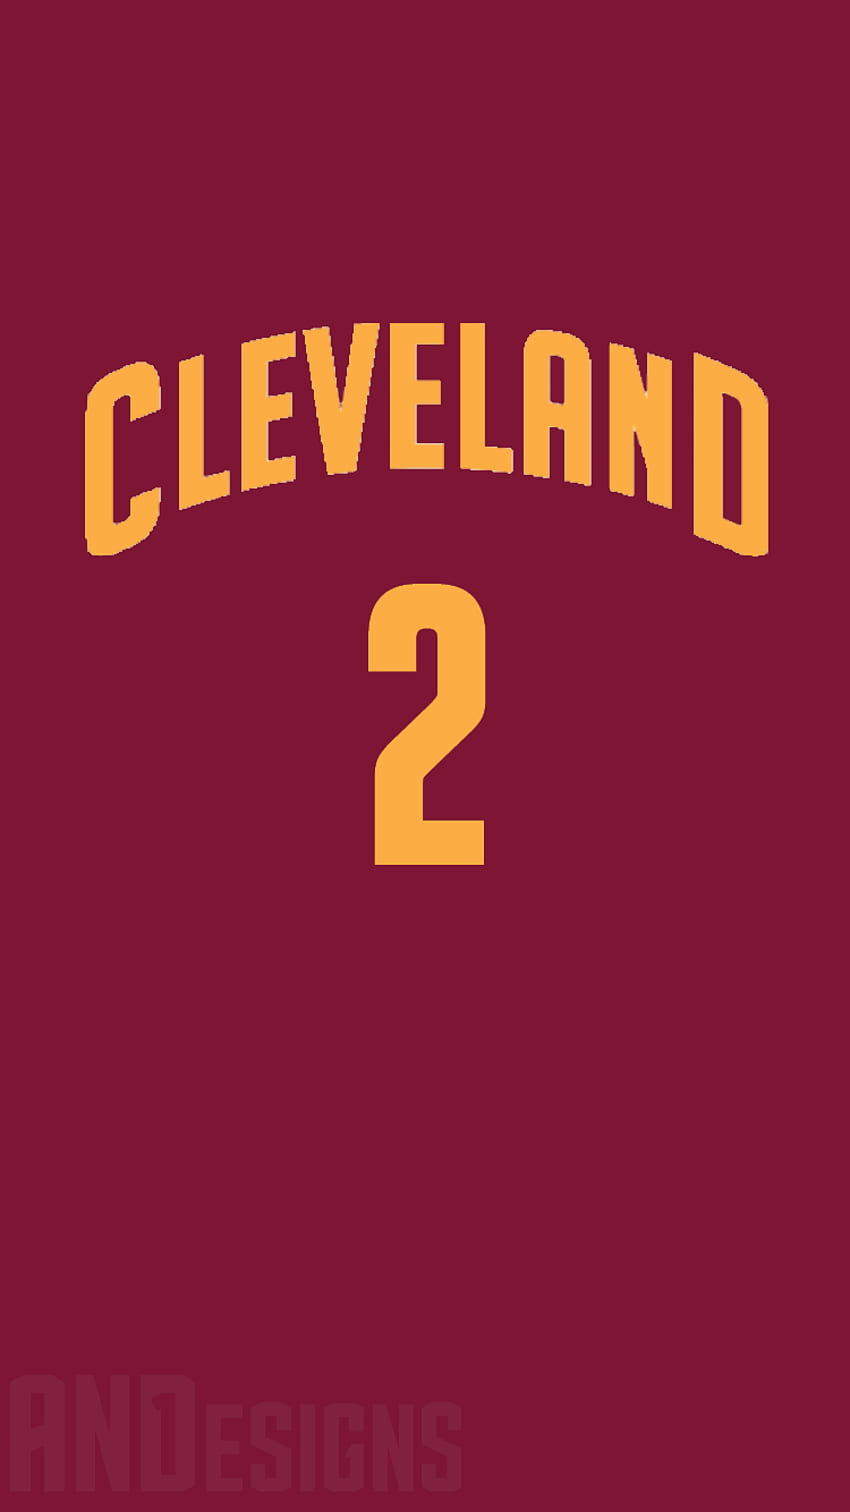 And1 Designs On NBA Jersey IPhone 6 6s . Kyrie Irving Logo , Lebron James Kyrie Irving, NBA Jersey wallpaper ponsel HD